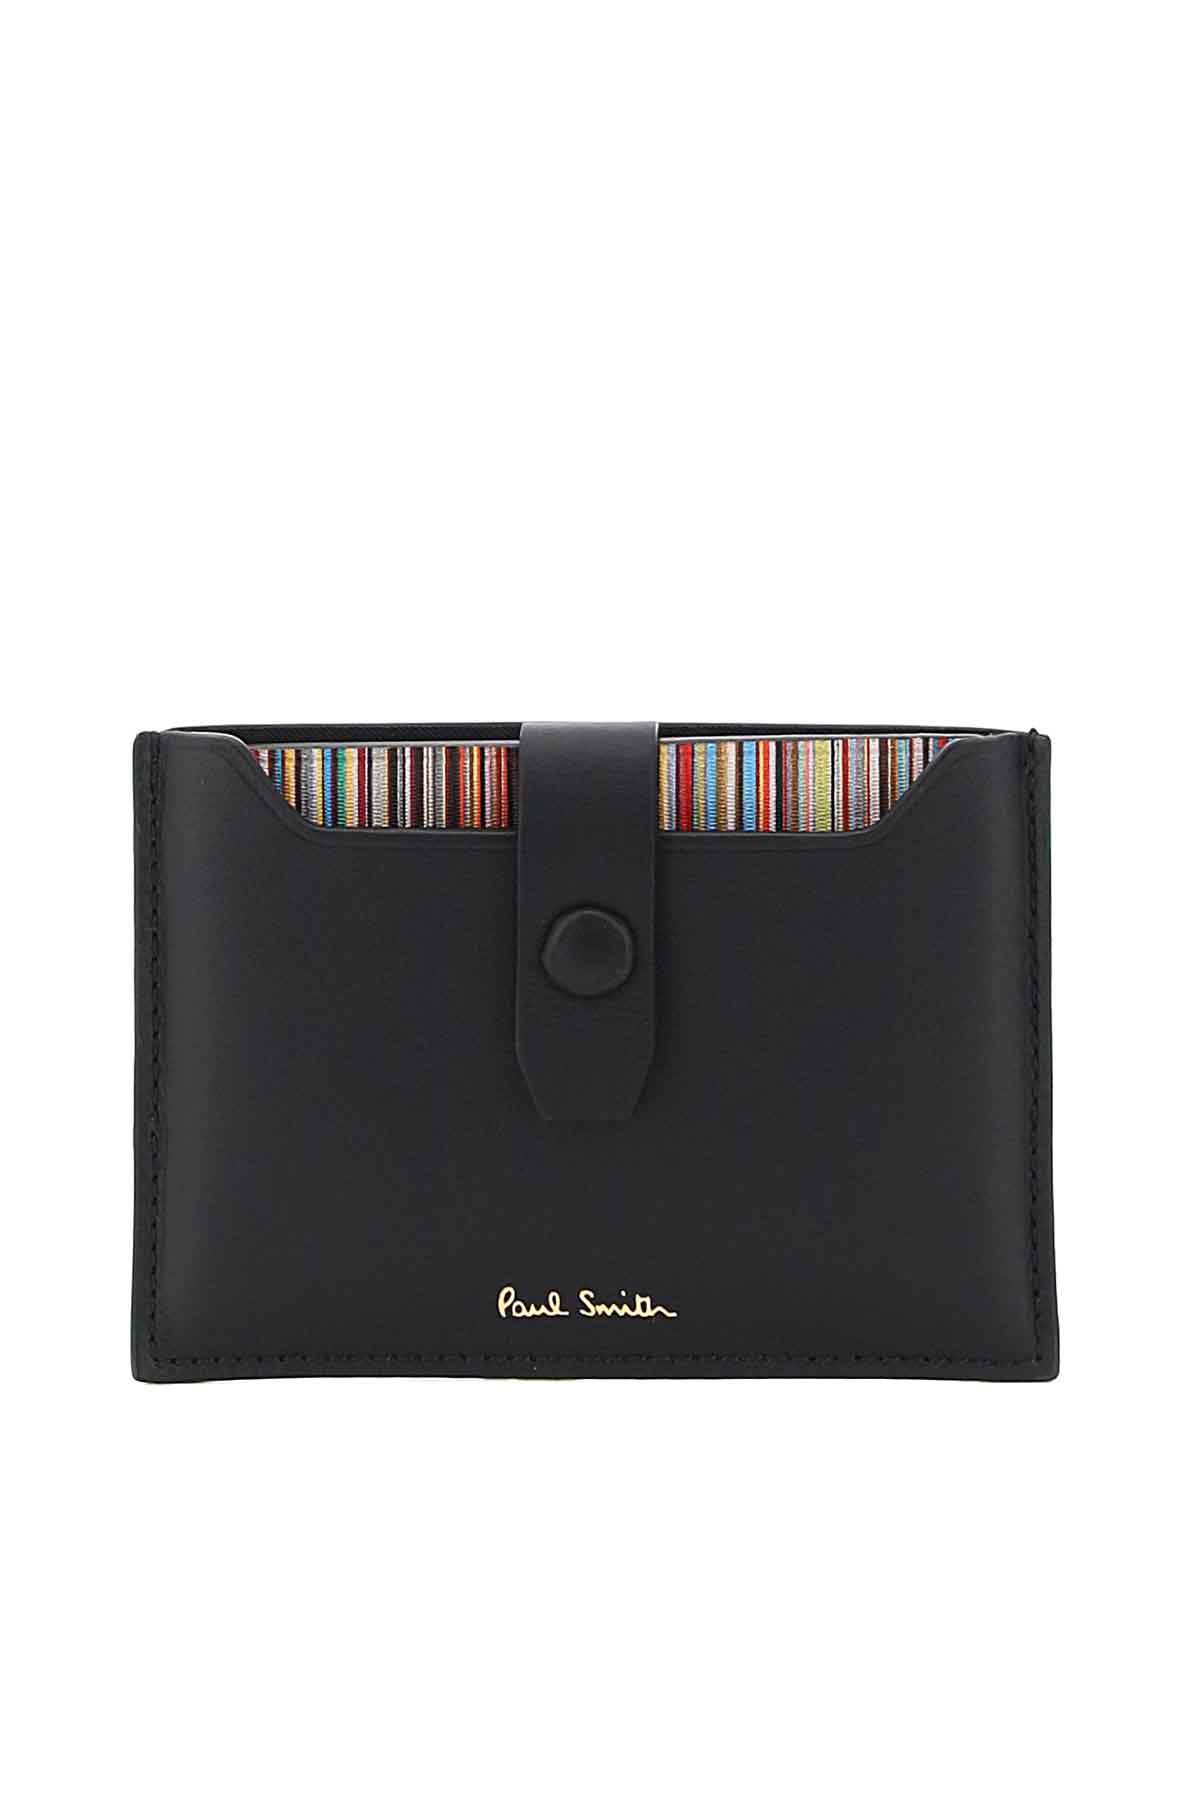 Paul Smith Extractable Card Holder In Black